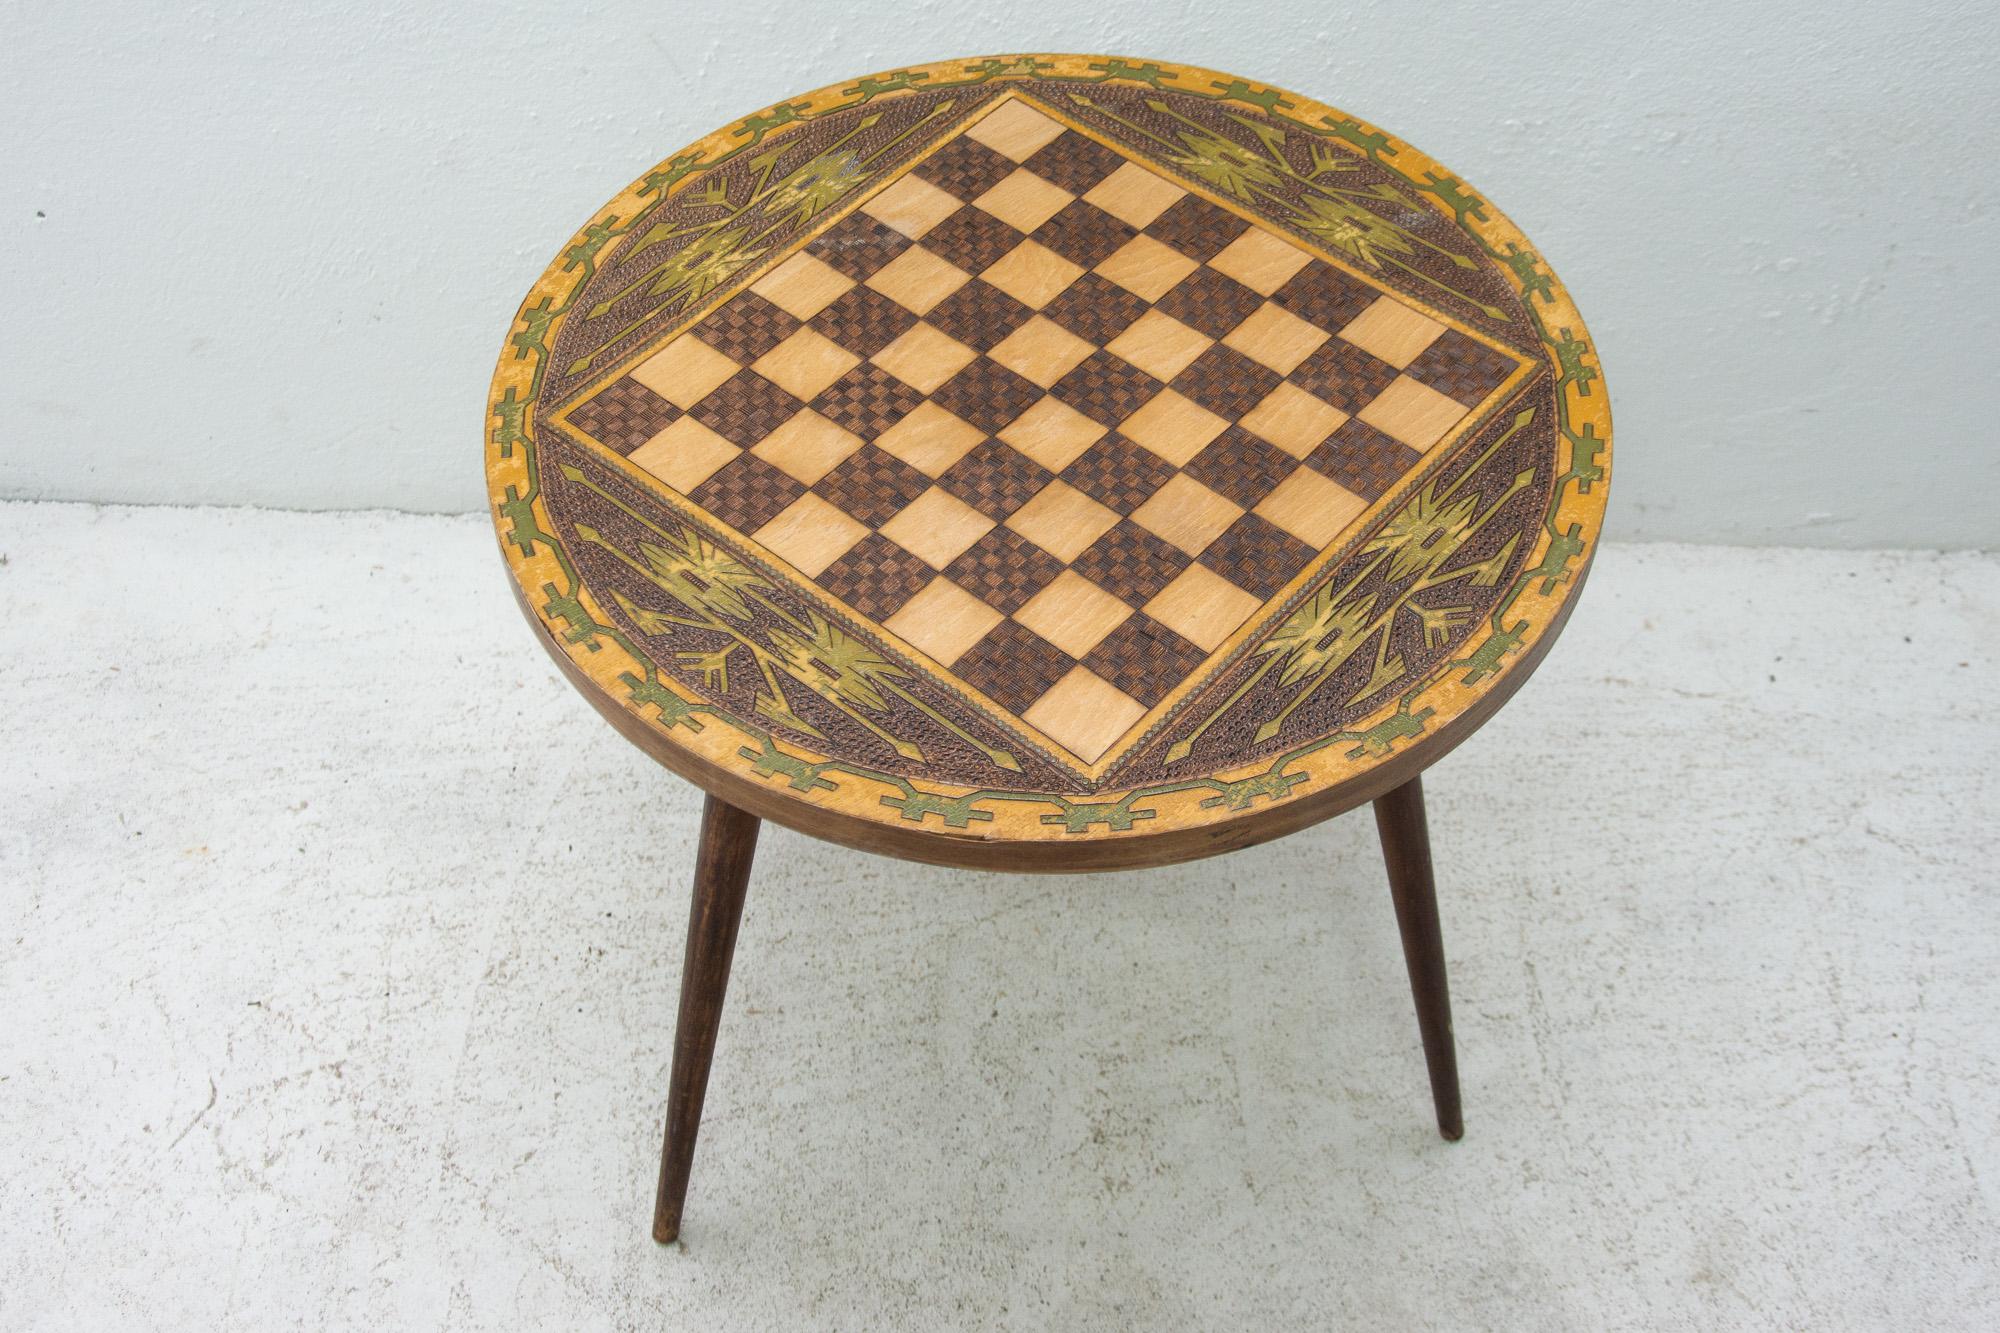 Wood Vintage Round Side Table with Chess Pattern, 1970s, Albania